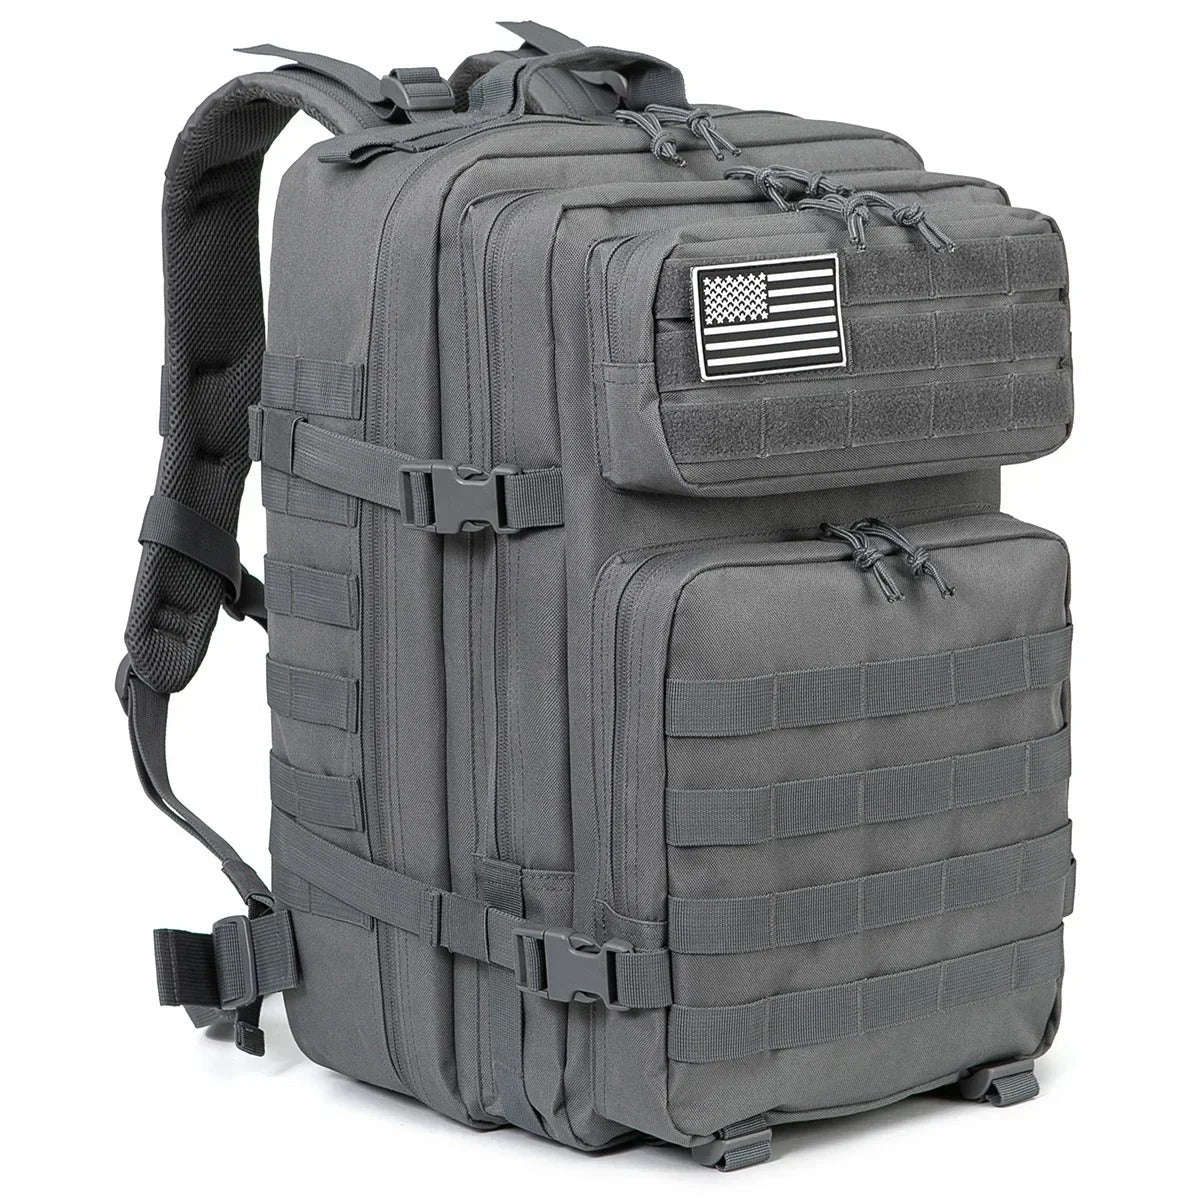 Military Gym Backpack - Gray